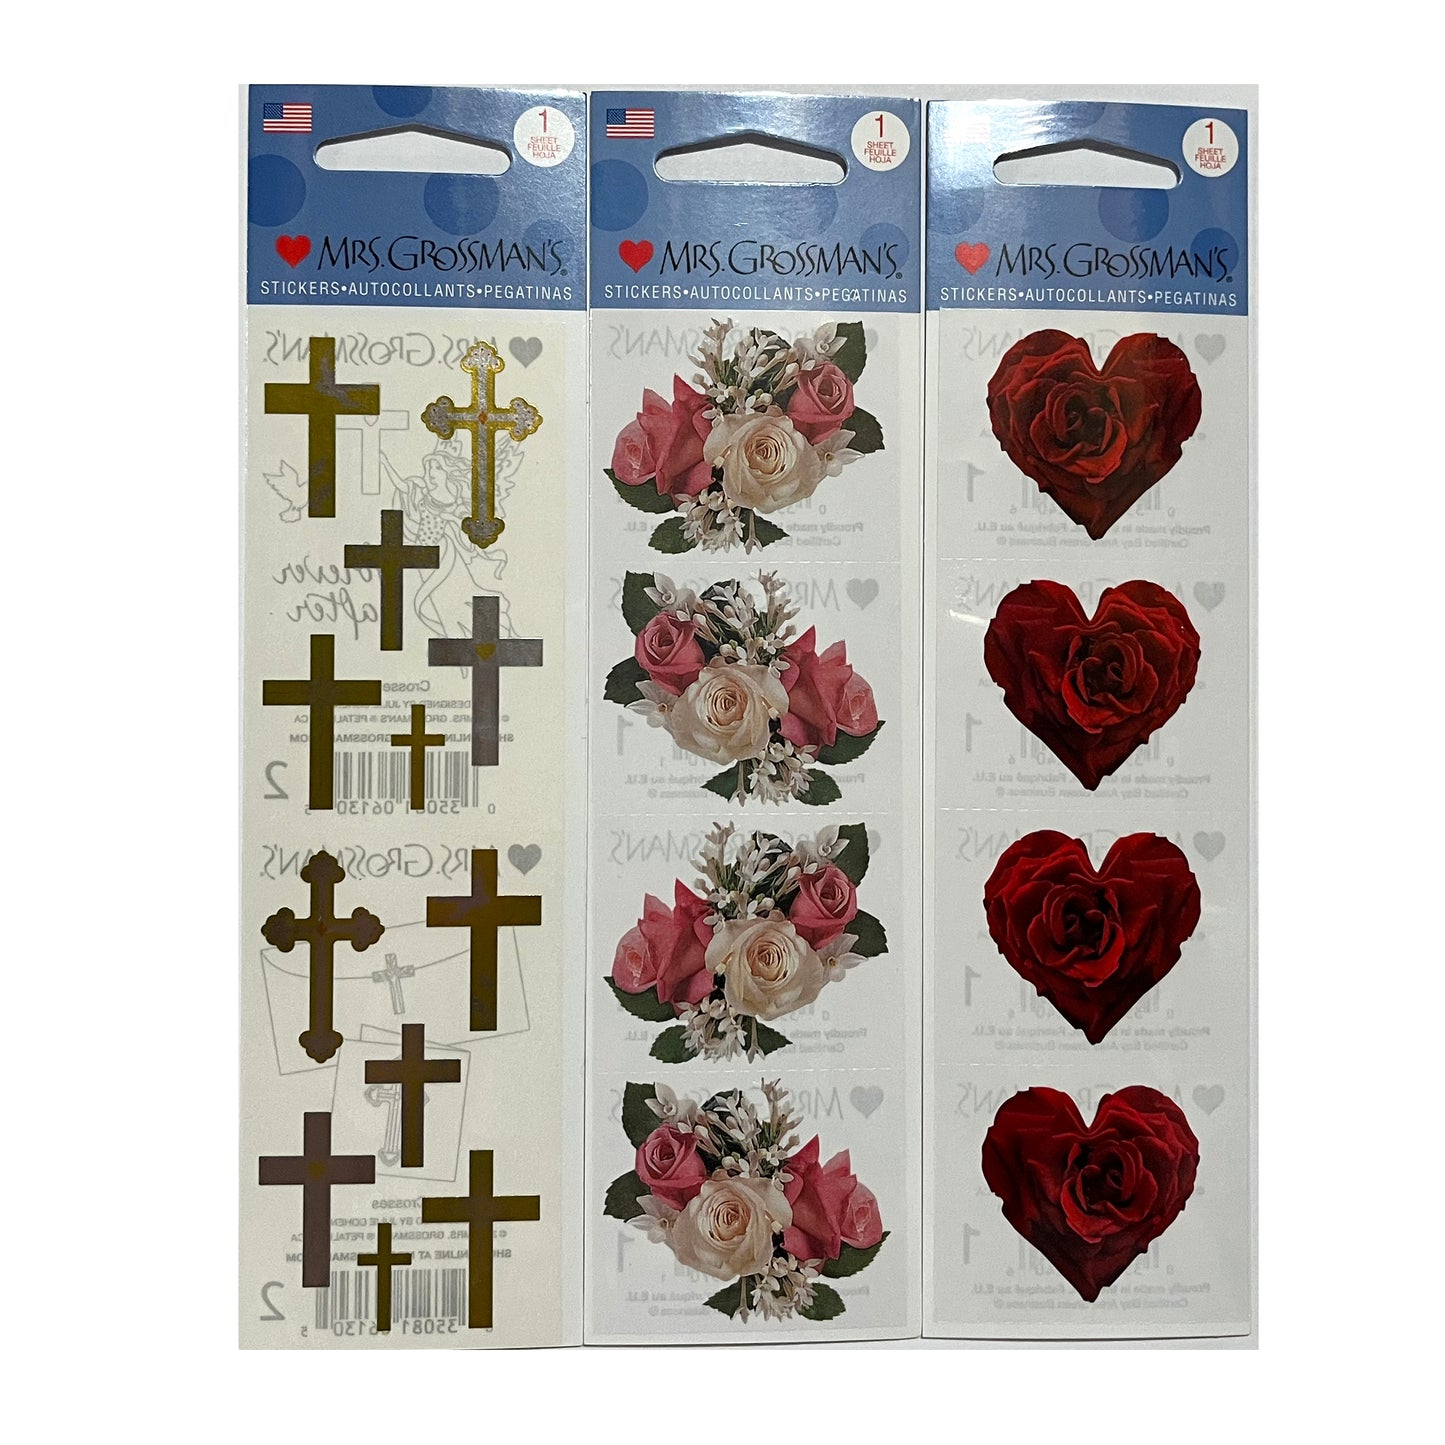 Mrs. Grossman's Cross and Roses Sticker Strips - New in Package